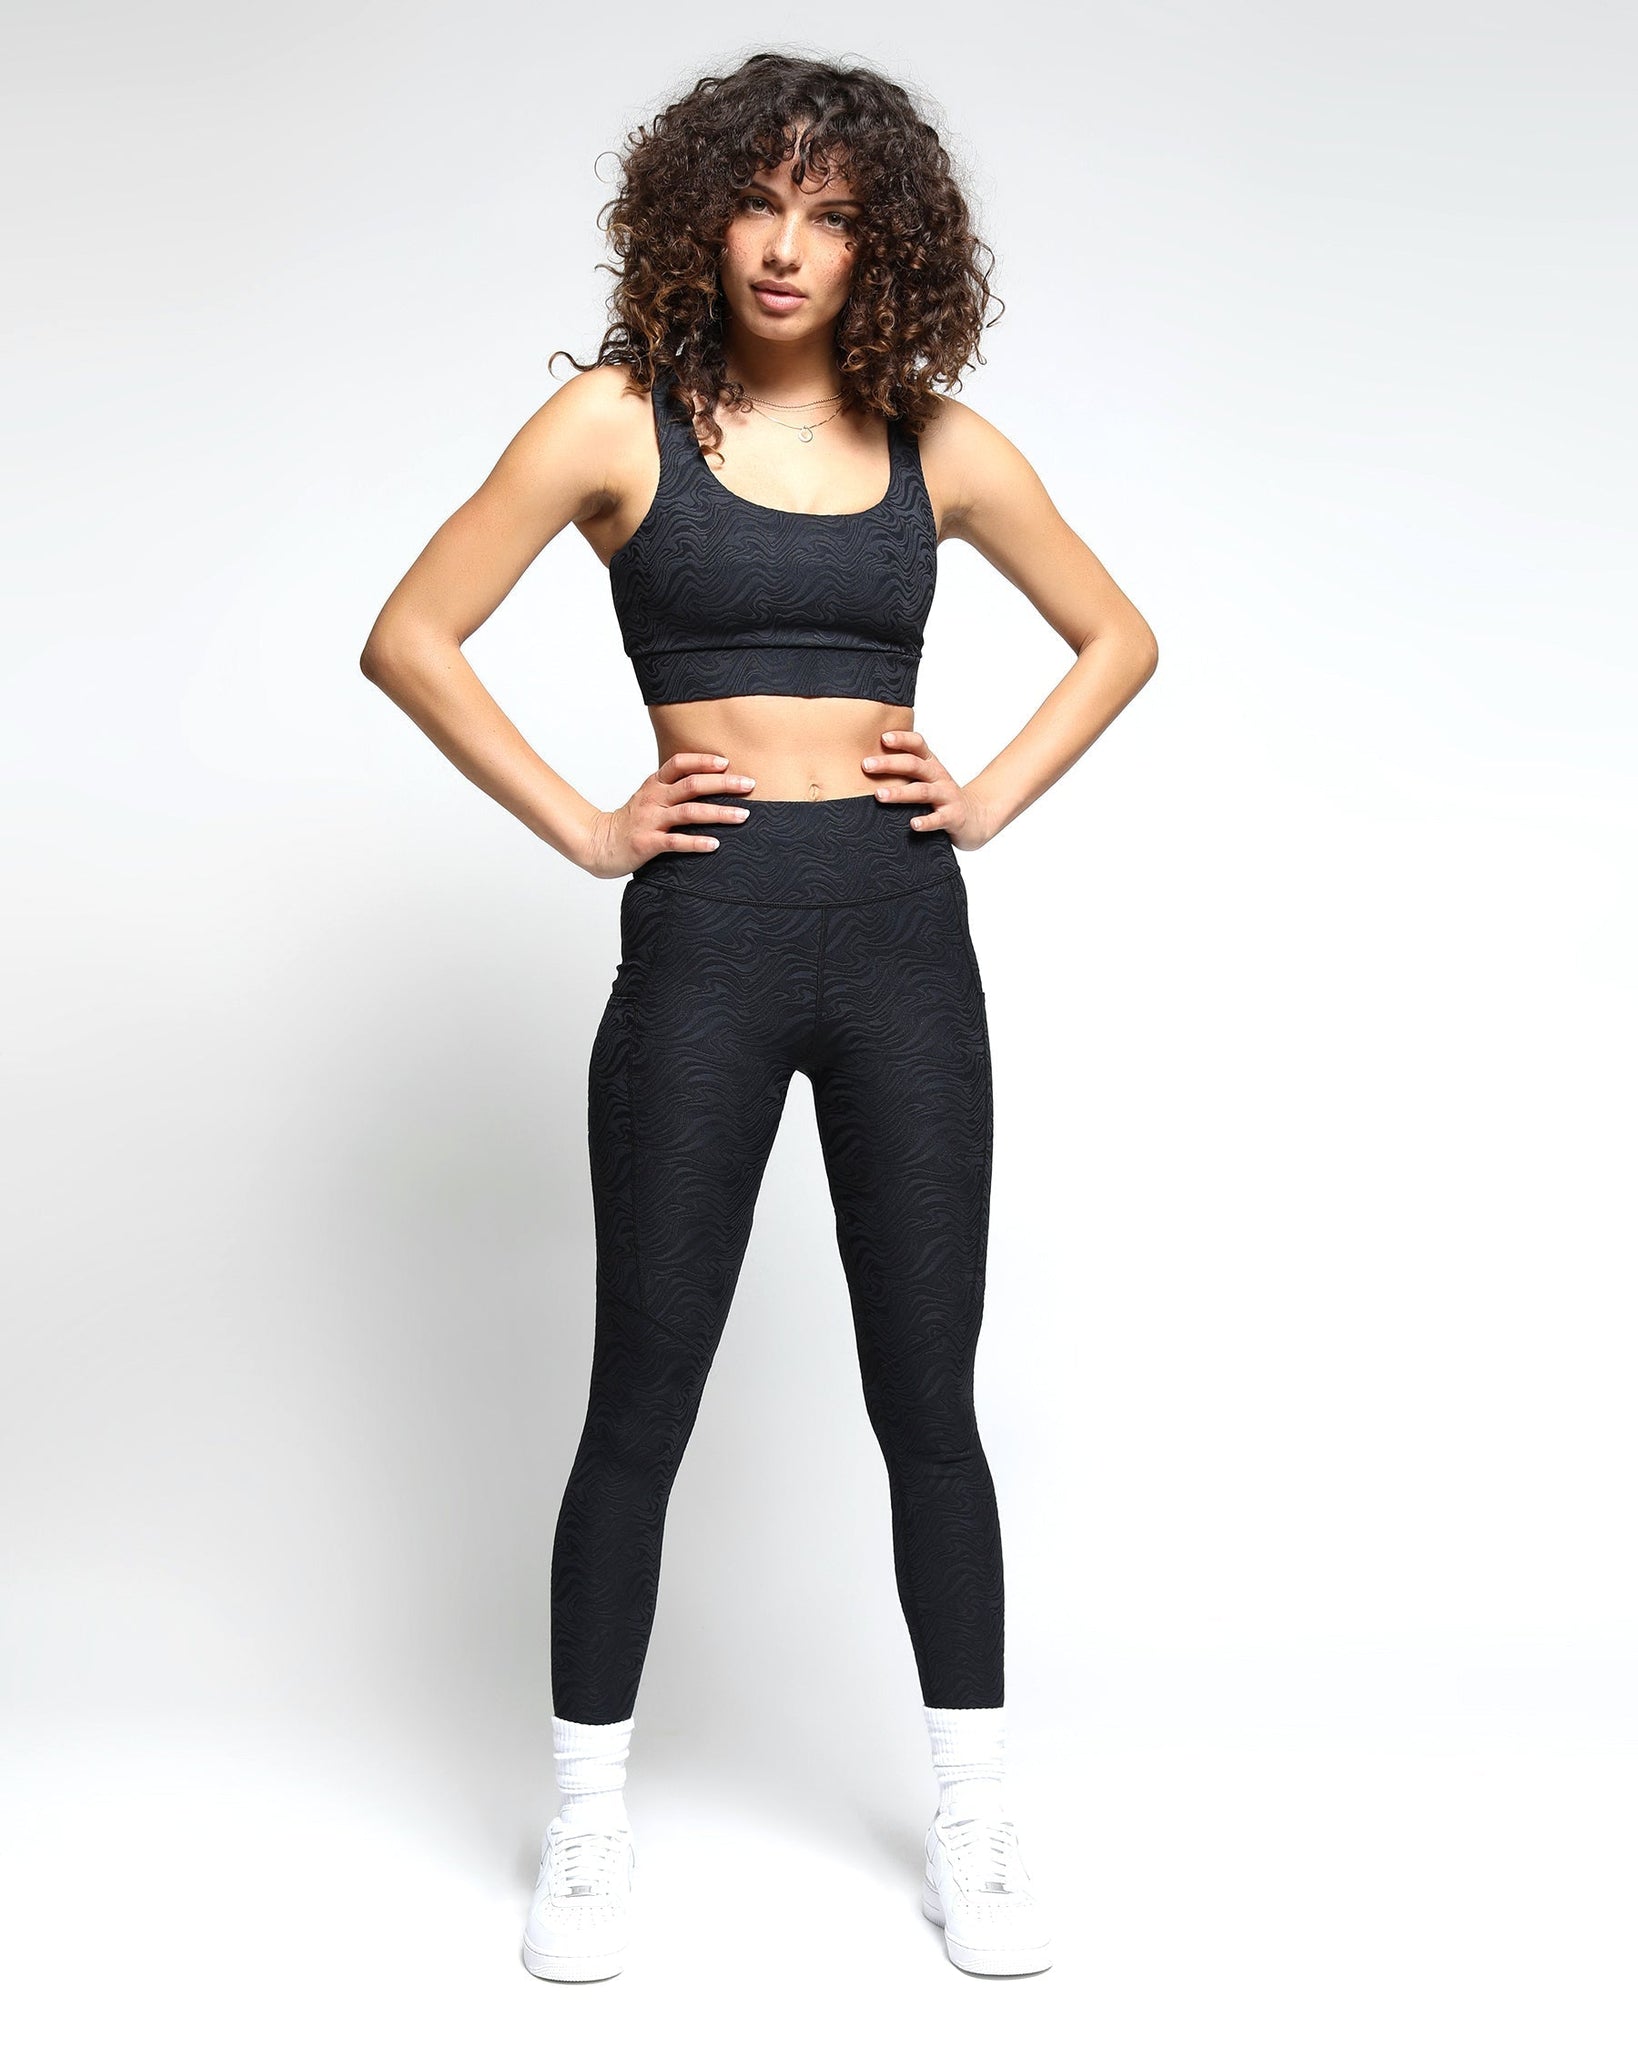 Black Women's Sports Leggings / Sports Tights: Shop up to −32